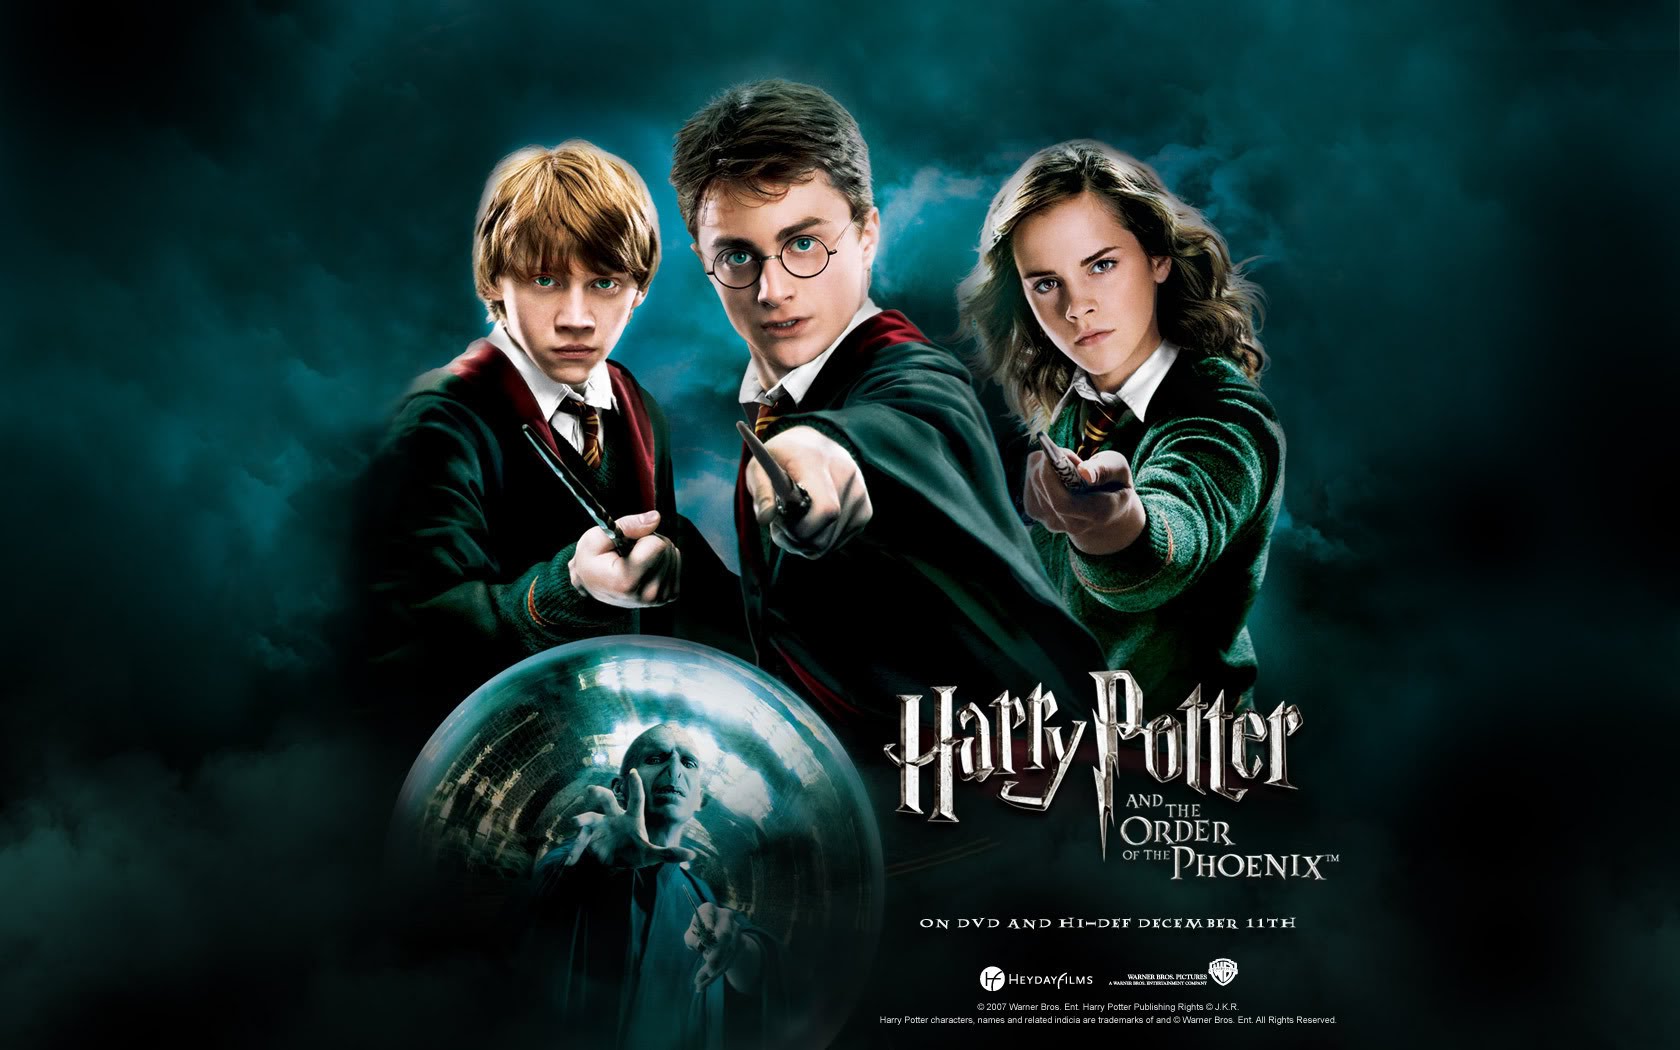 harry potter order of the phoenix online free 123movies